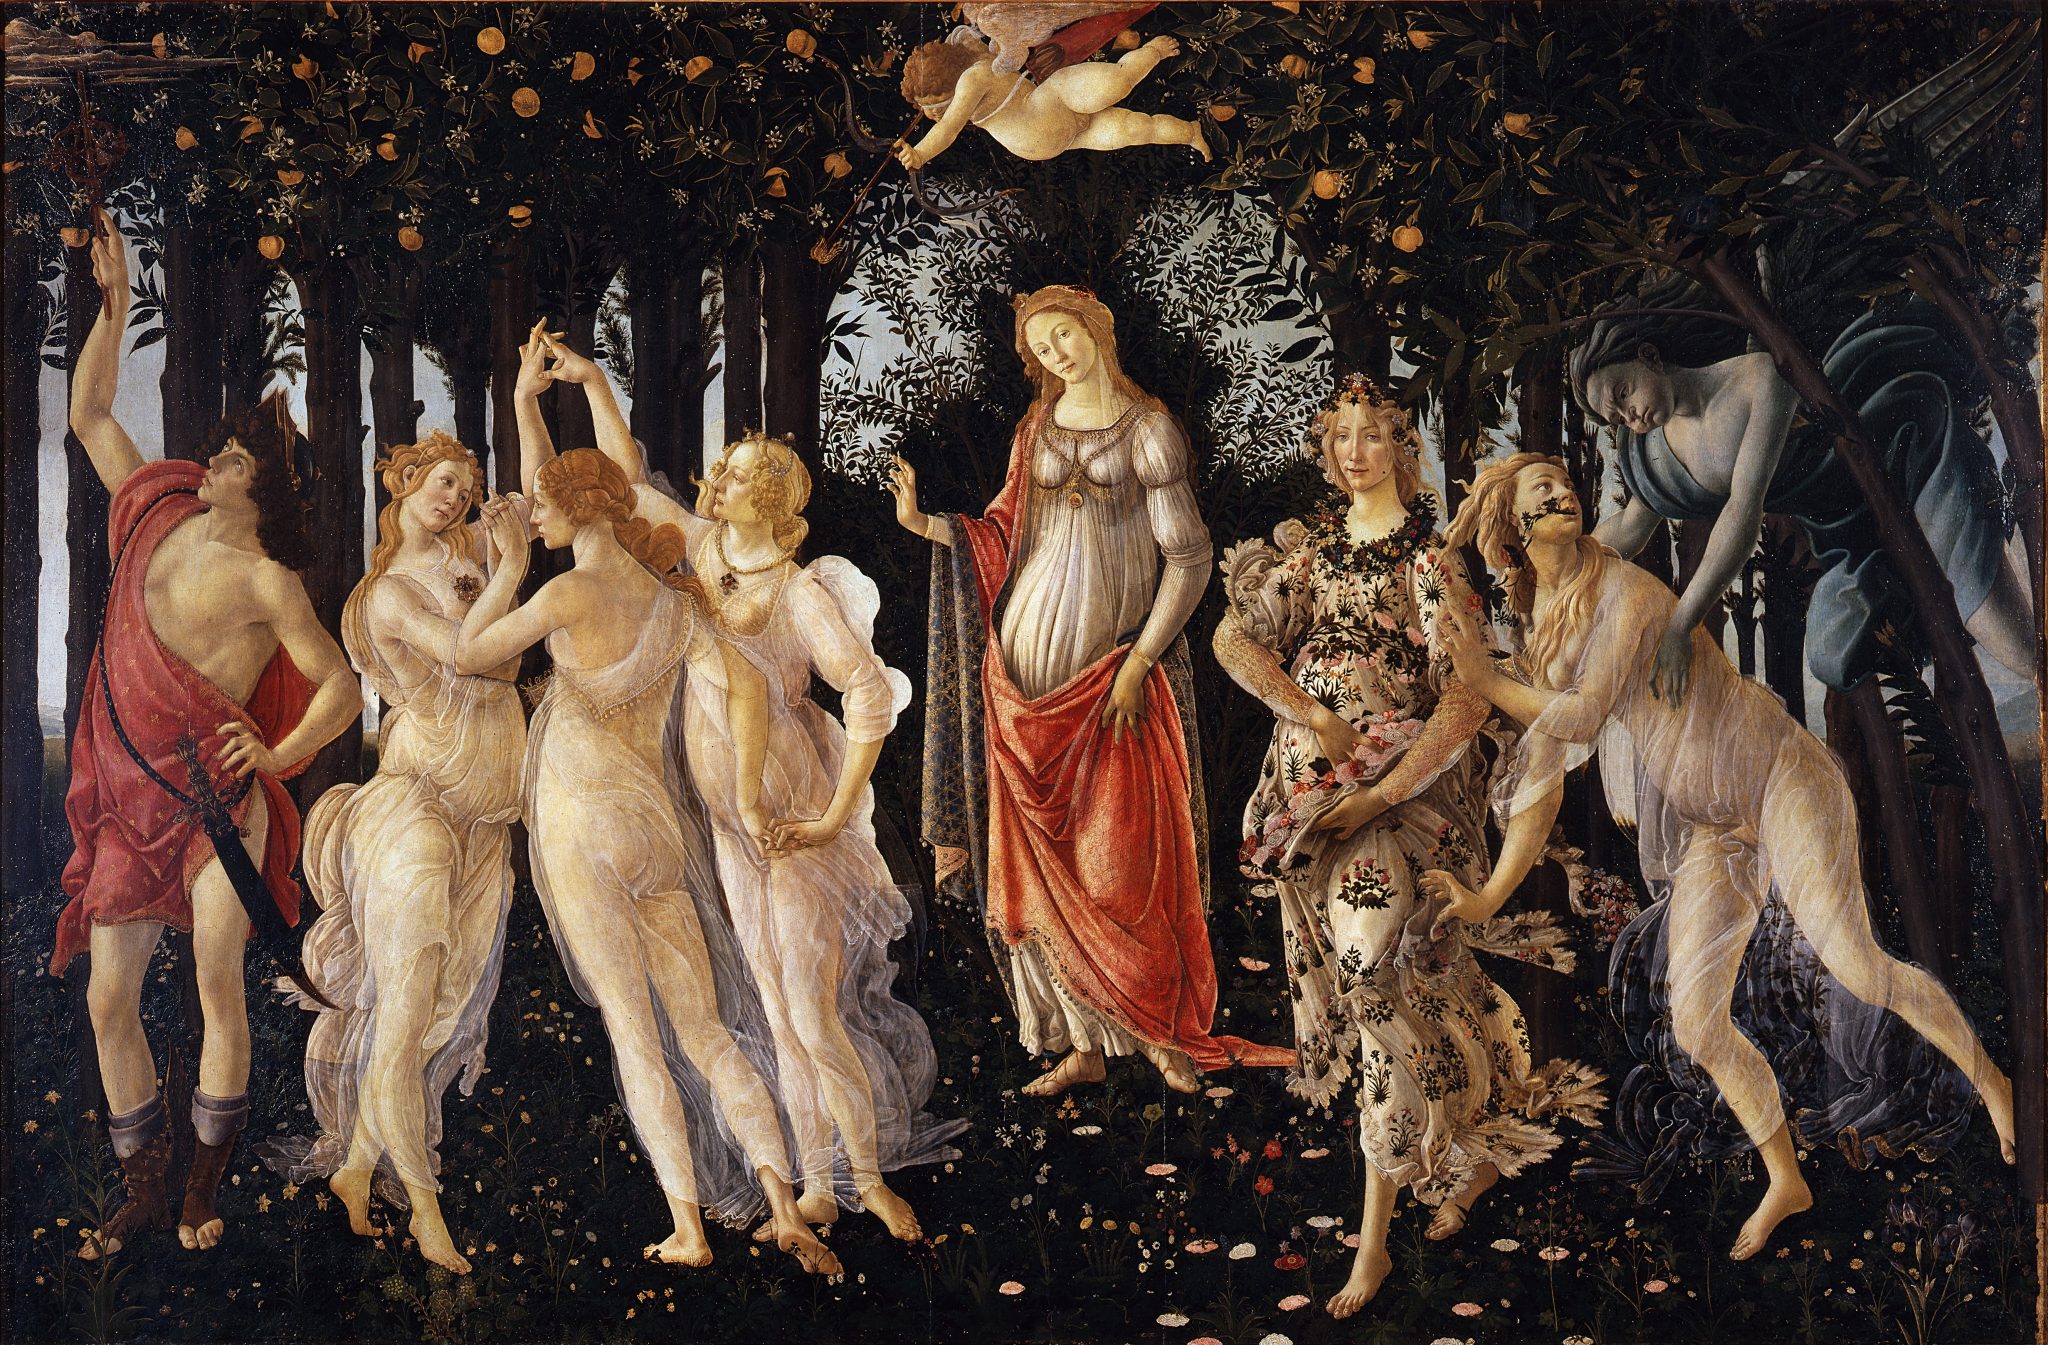 Botticelli's Primavera, a large panel painting from the 1470s-1480s.